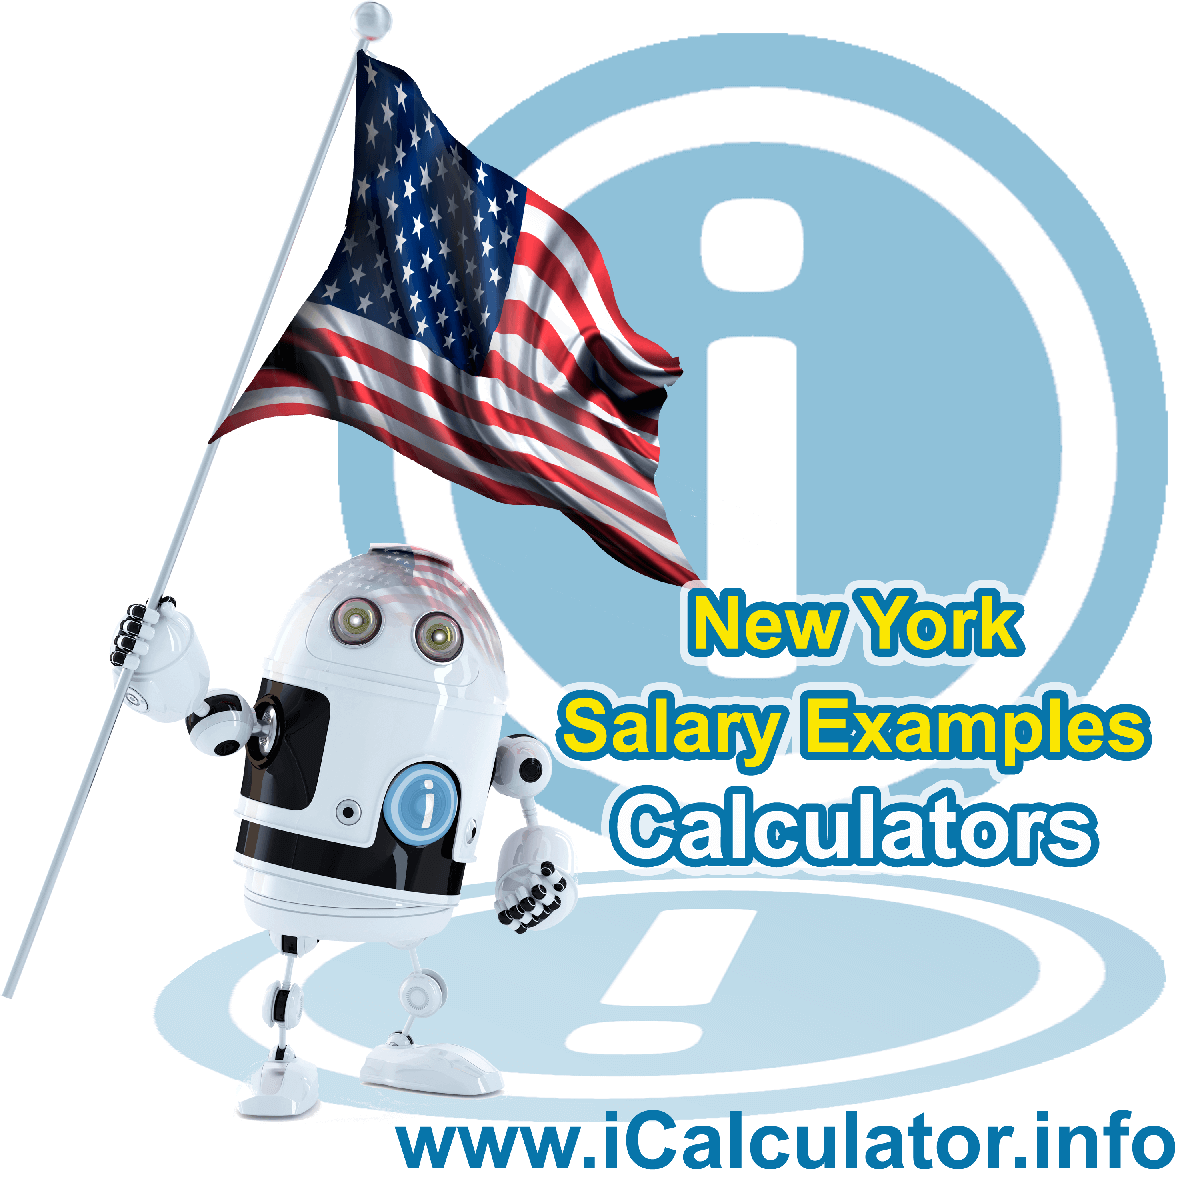 $ 20,000.00 After Tax in New York| iCalculator™ | $ 20,000.00 salary after tax example for 2023 tax year in New York. Federal and New York State income tax plus social security deductions and personal tax exemptions and tax allowances for 2023 